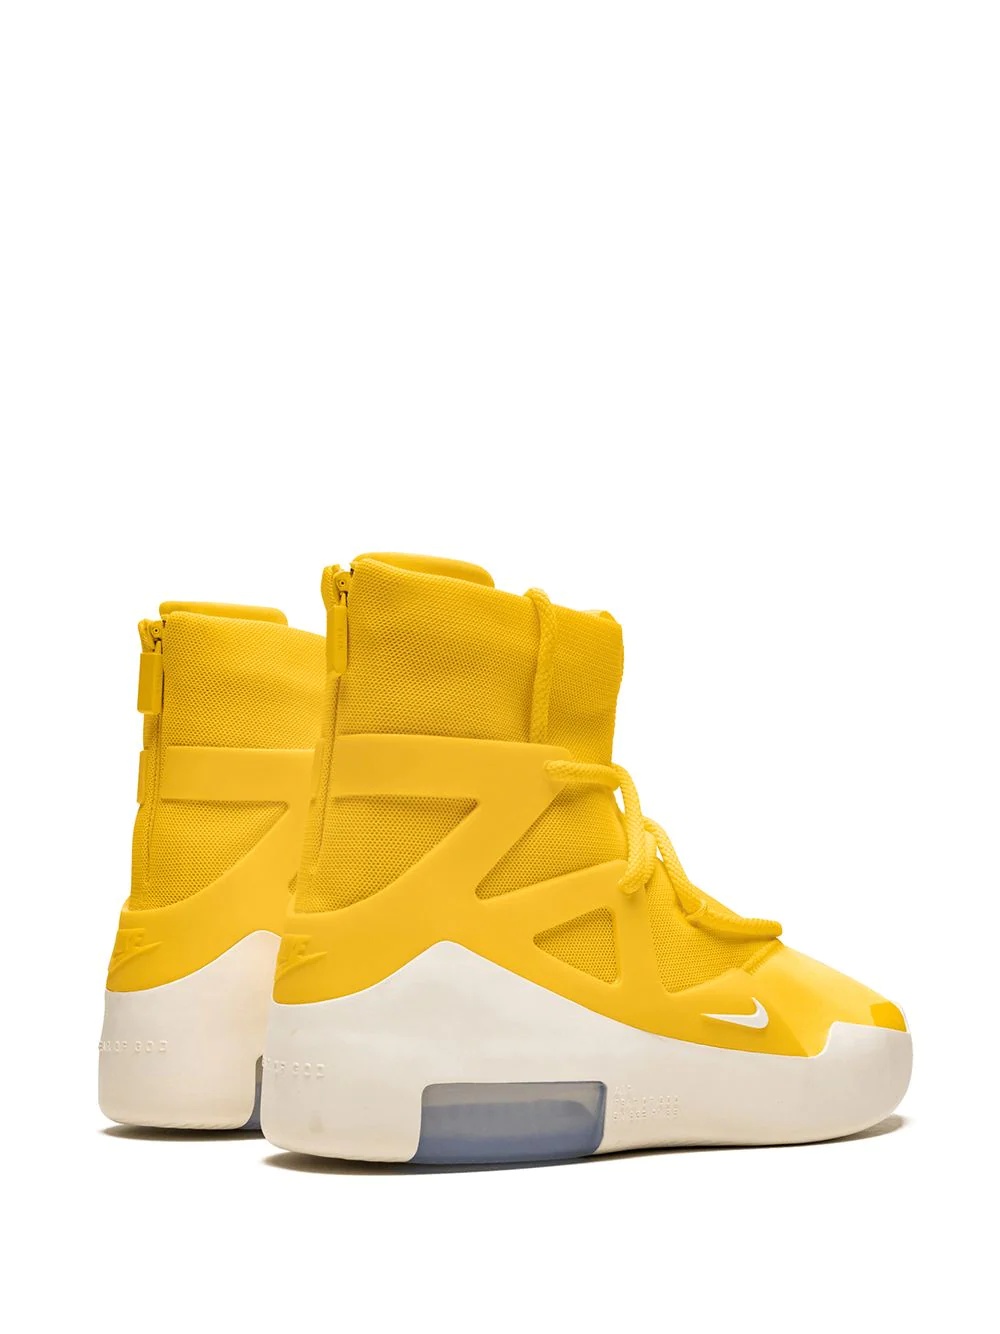 Air Fear Of God 1 "Amarillo" sneakers - 3